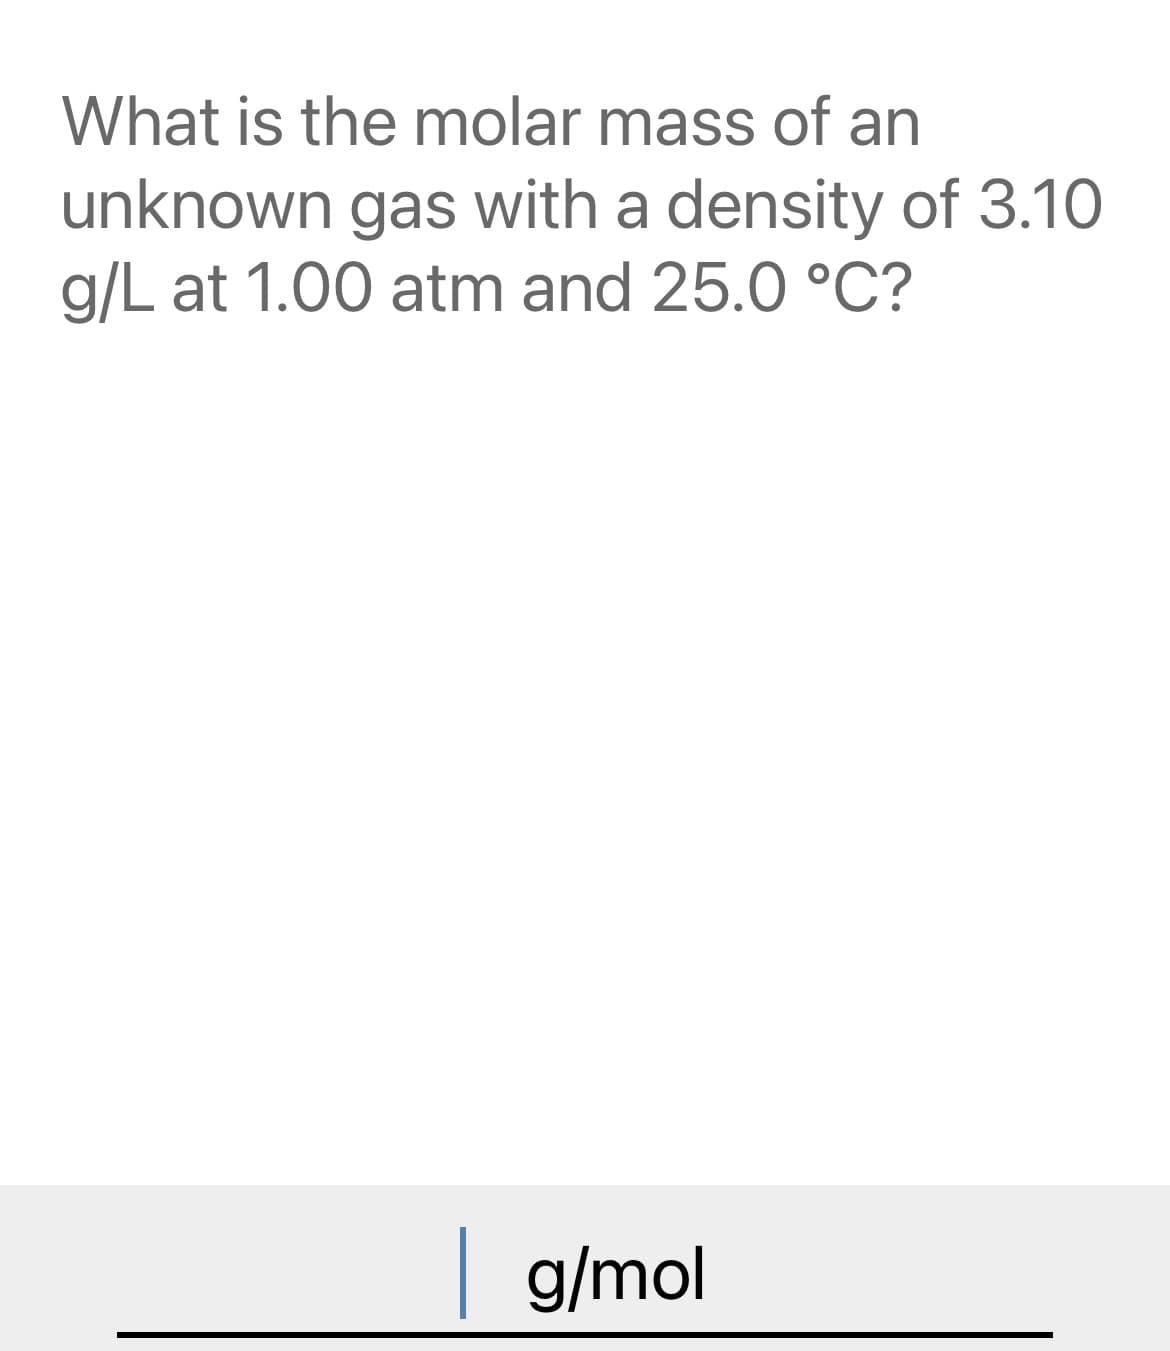 What is the molar mass of an
unknown gas with a density of 3.10
g/L at 1.00 atm and 25.0 °C?
g/mol